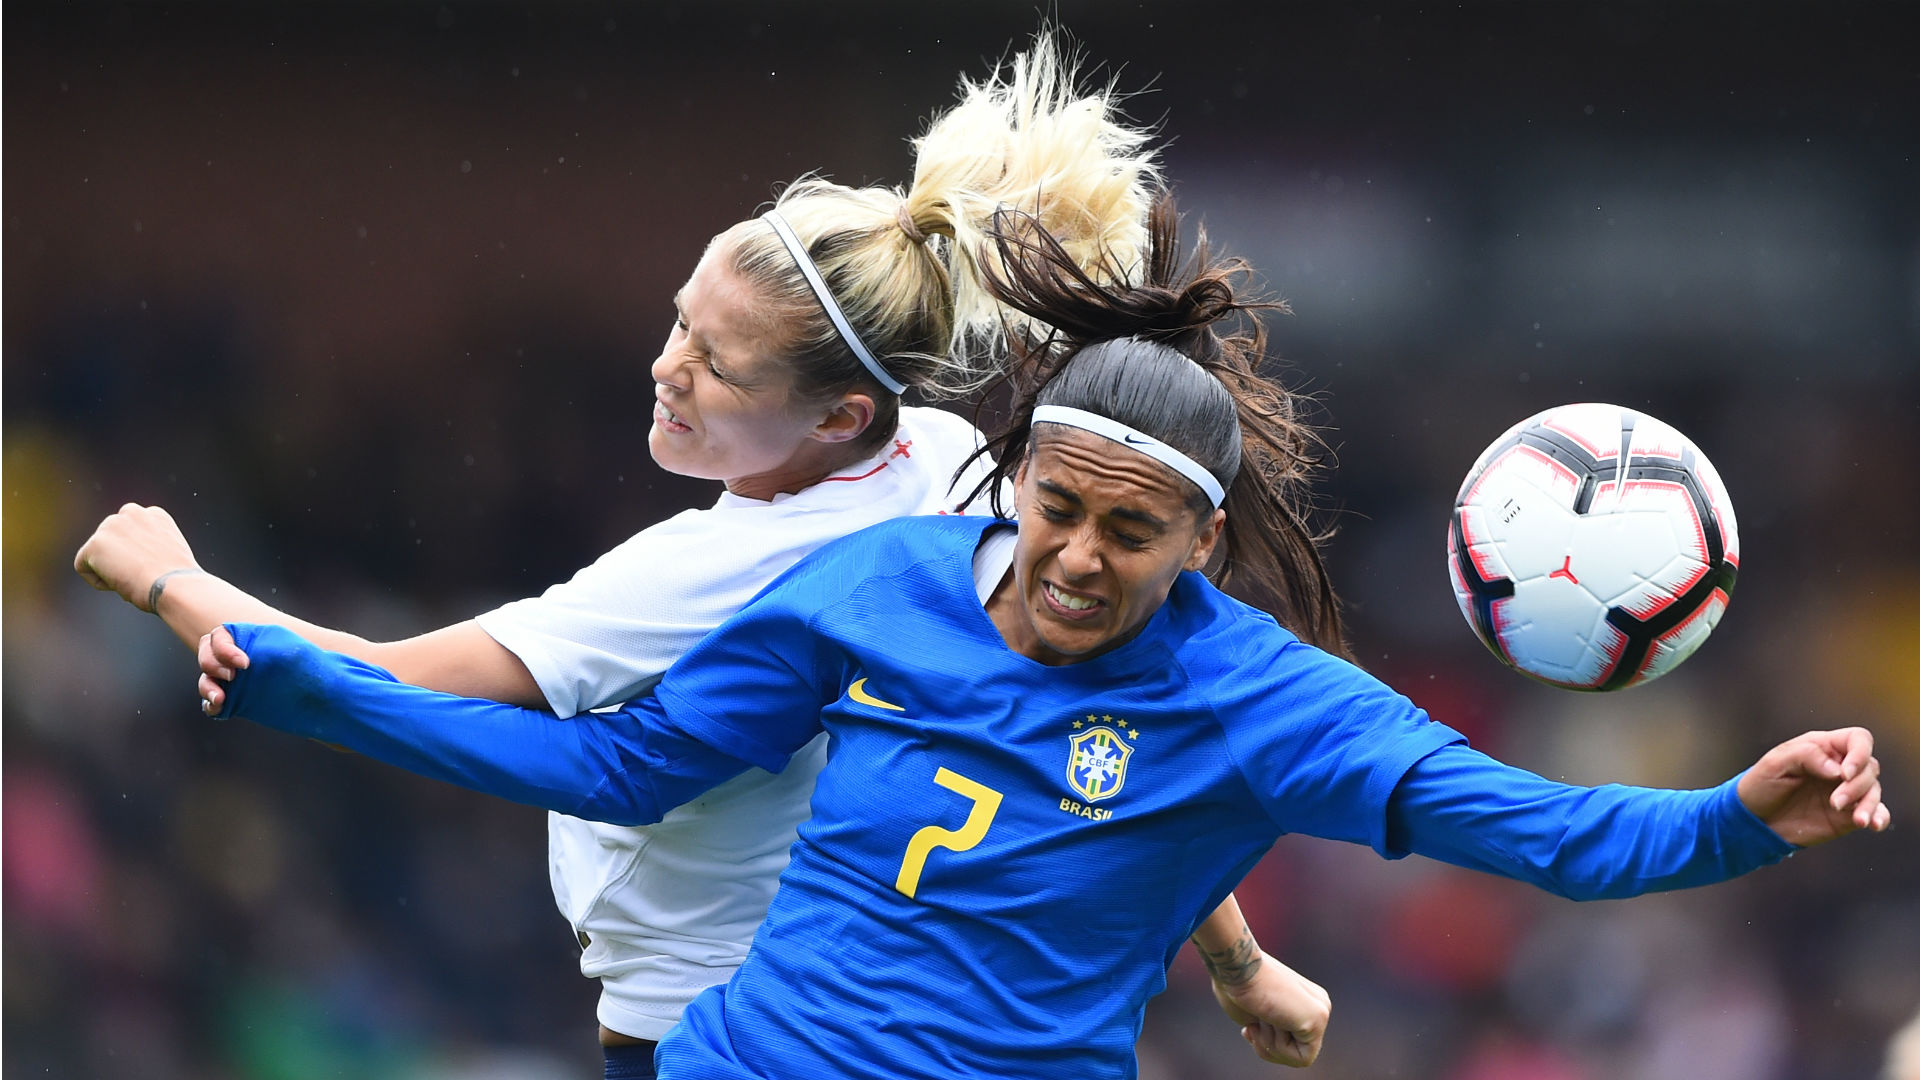 A thigh injury sustained in training on Monday means Andressa Alves has played her last game for Brazil at the 2019 Women's World Cup.